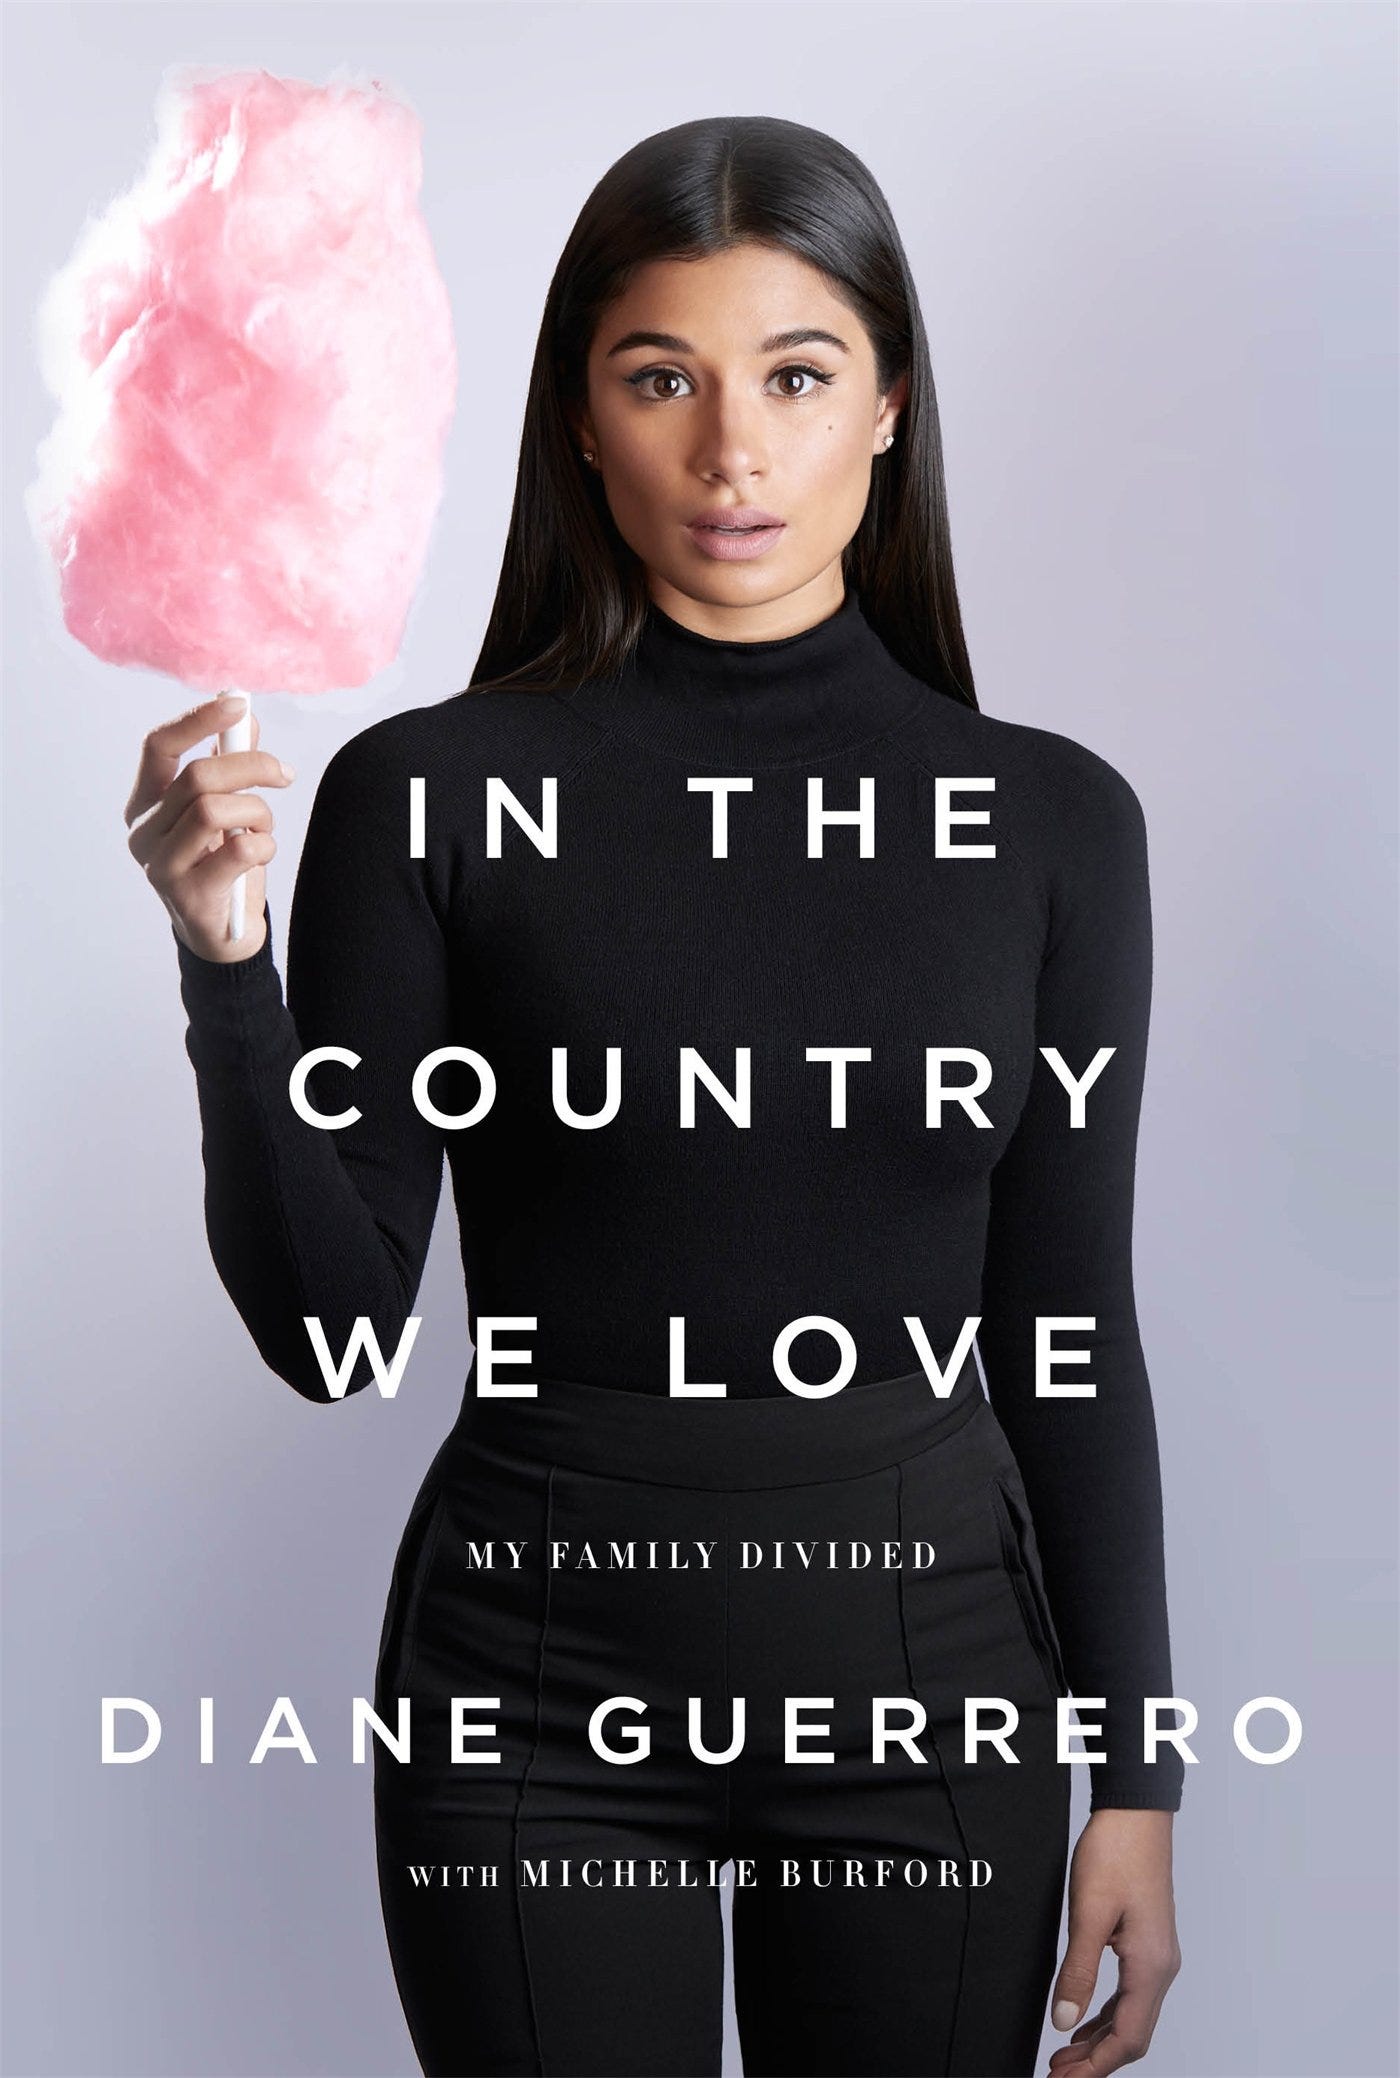 “In the Country We Love: My Family Divided,” by Diane Guerrero.